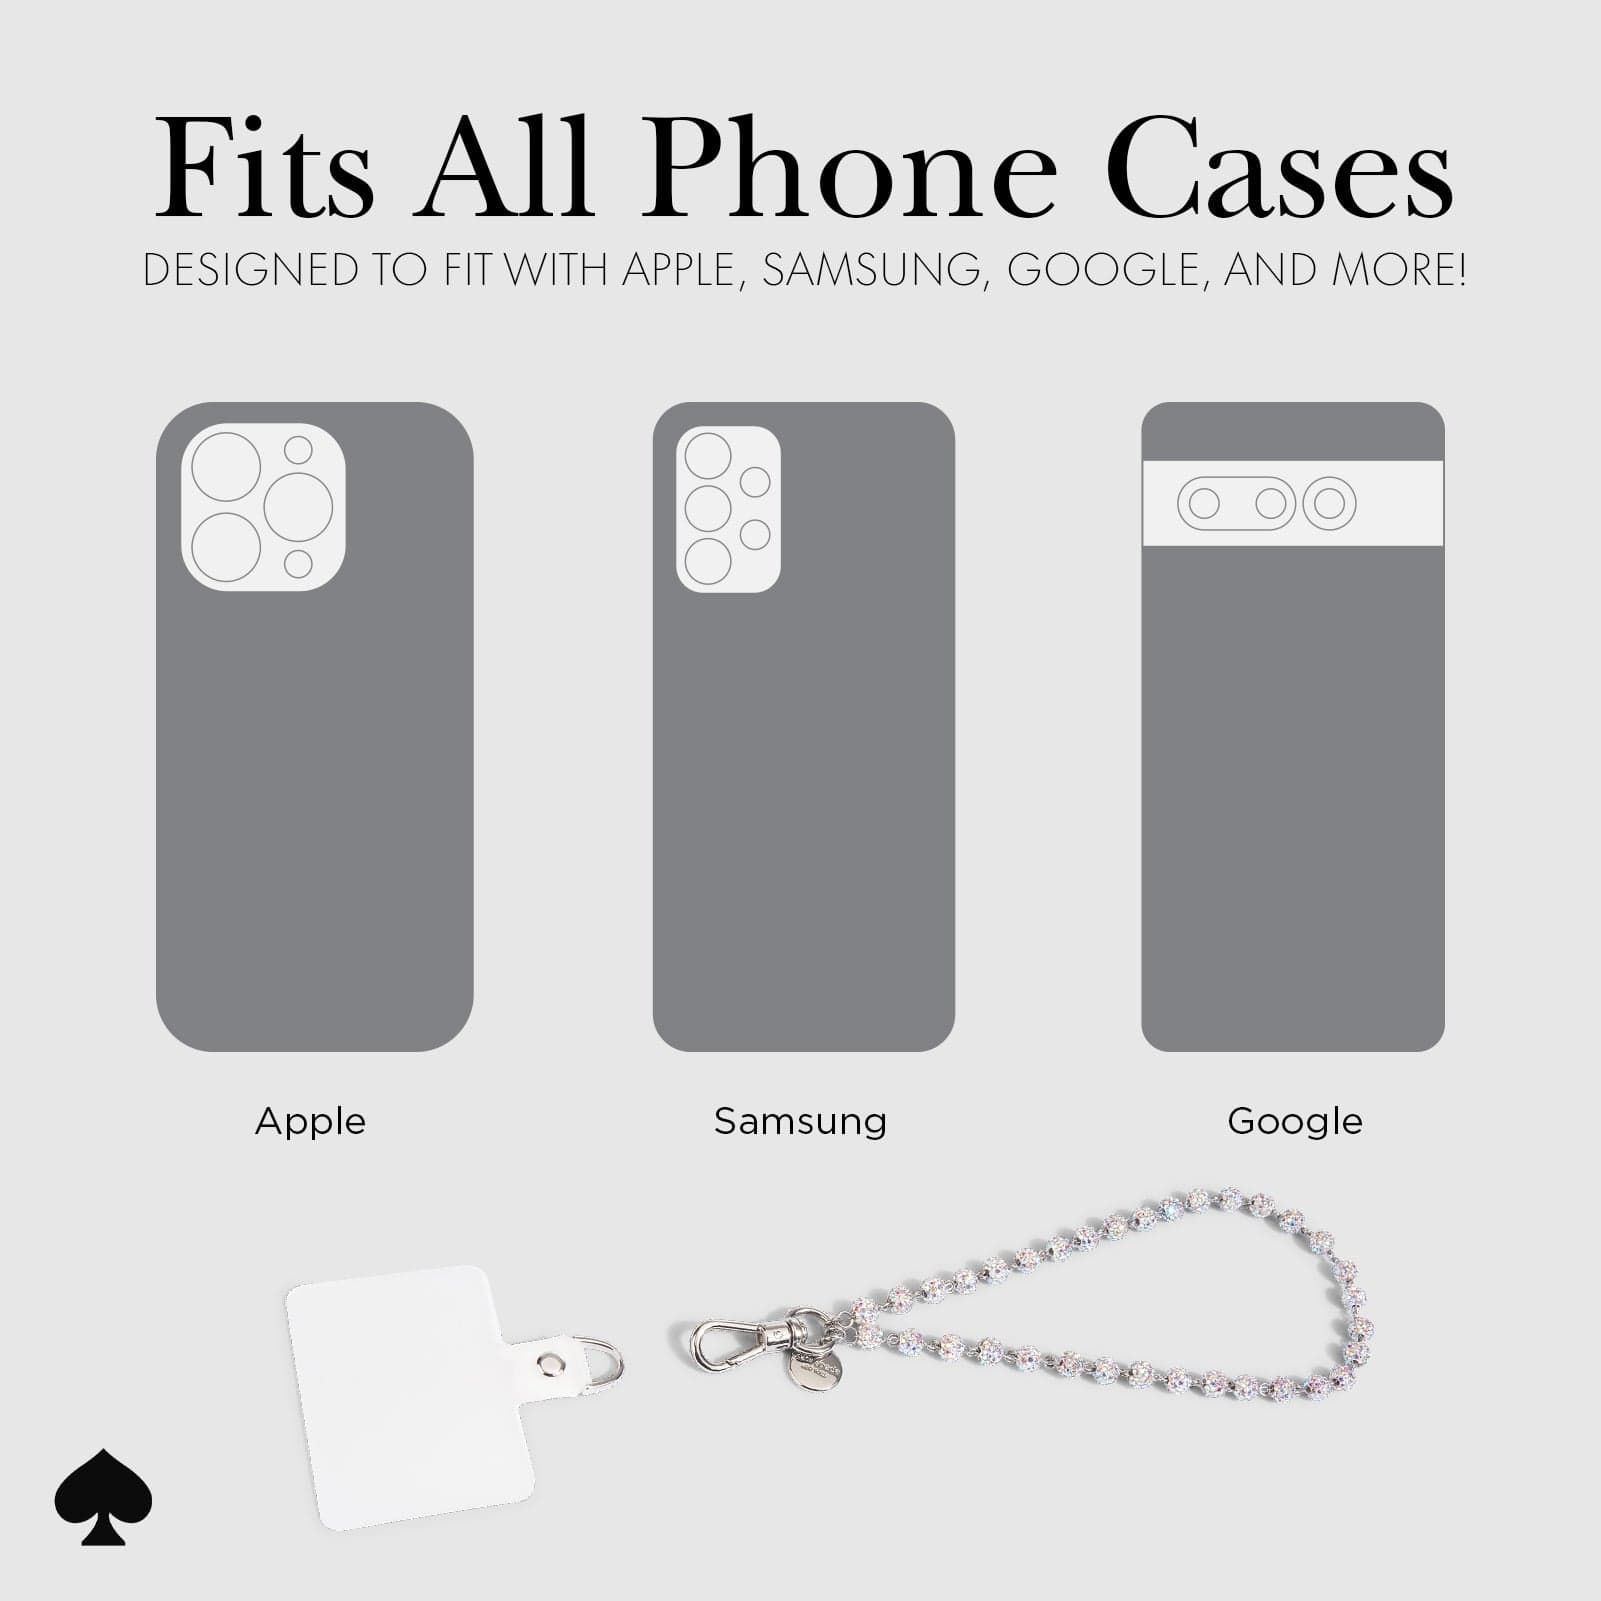 FITS ALL PHONE CASES DESIGNED TO FIT WITH APPLE, SAMSUNG, GOOGLE AND MORE!